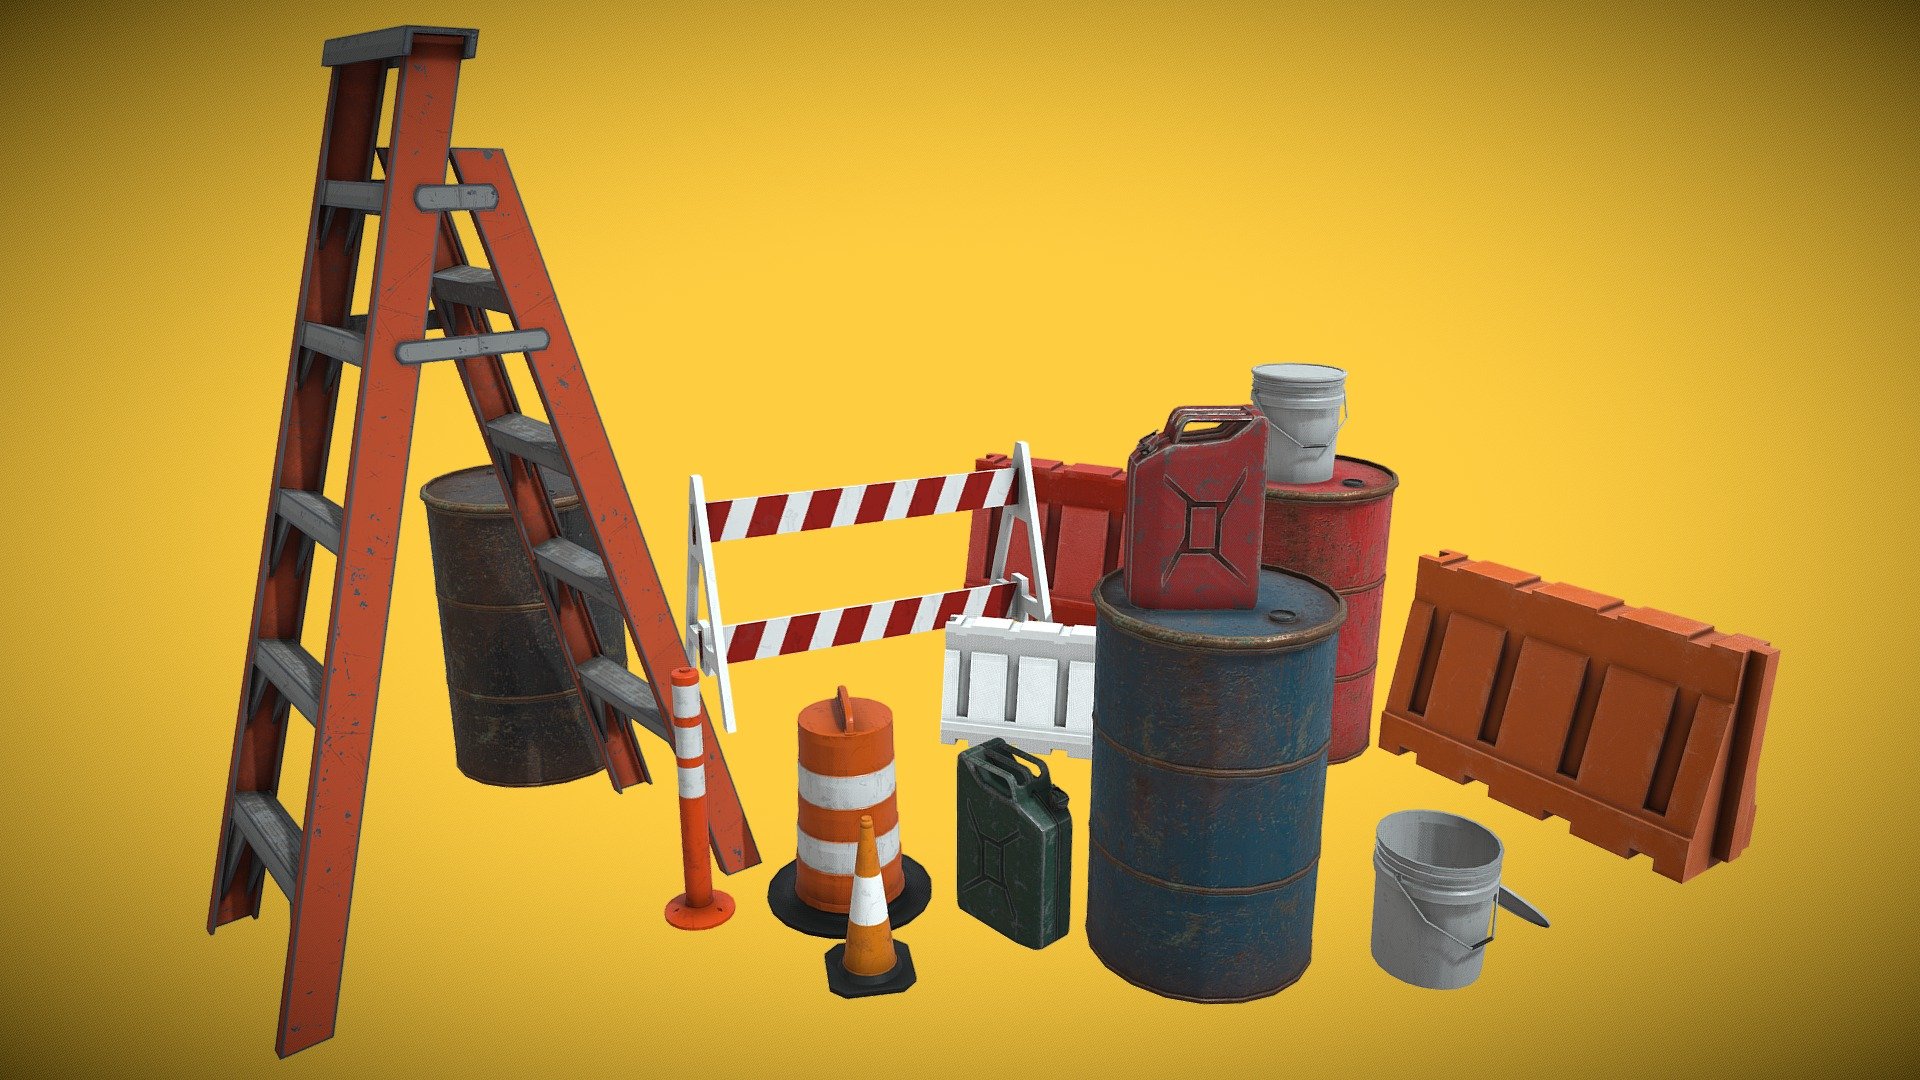 Low Poly urban prop pack of game ready models with PBR textures.

Textures included: Albedo, Normals, Metalness, Roughness, AO

I used autodesk maya 2020 for madeling and substance painter for texturing.

Pack included:

Gallon_drum / 2k textures / 3 different color / 3 different variation

Ladder / 2k texture

Plastic_jersey / 1k texture  / 3 different color

Gasoline_gallon / 2k textures / 2 different color / 2 different variation

Bucket / 1k textures

Road_barrier / 1k texture

Traffic_cone / 1k texture

Traffic_drums / 1k texture

Traffic_Delineator / 1k texture

Units : centimeter

All objects in the scene included in pack

These models can be used for any game, any project, etc. You may not resell any content
 - Urban_prop_pack02 - Buy Royalty Free 3D model by peyman.khaleghi 3d model